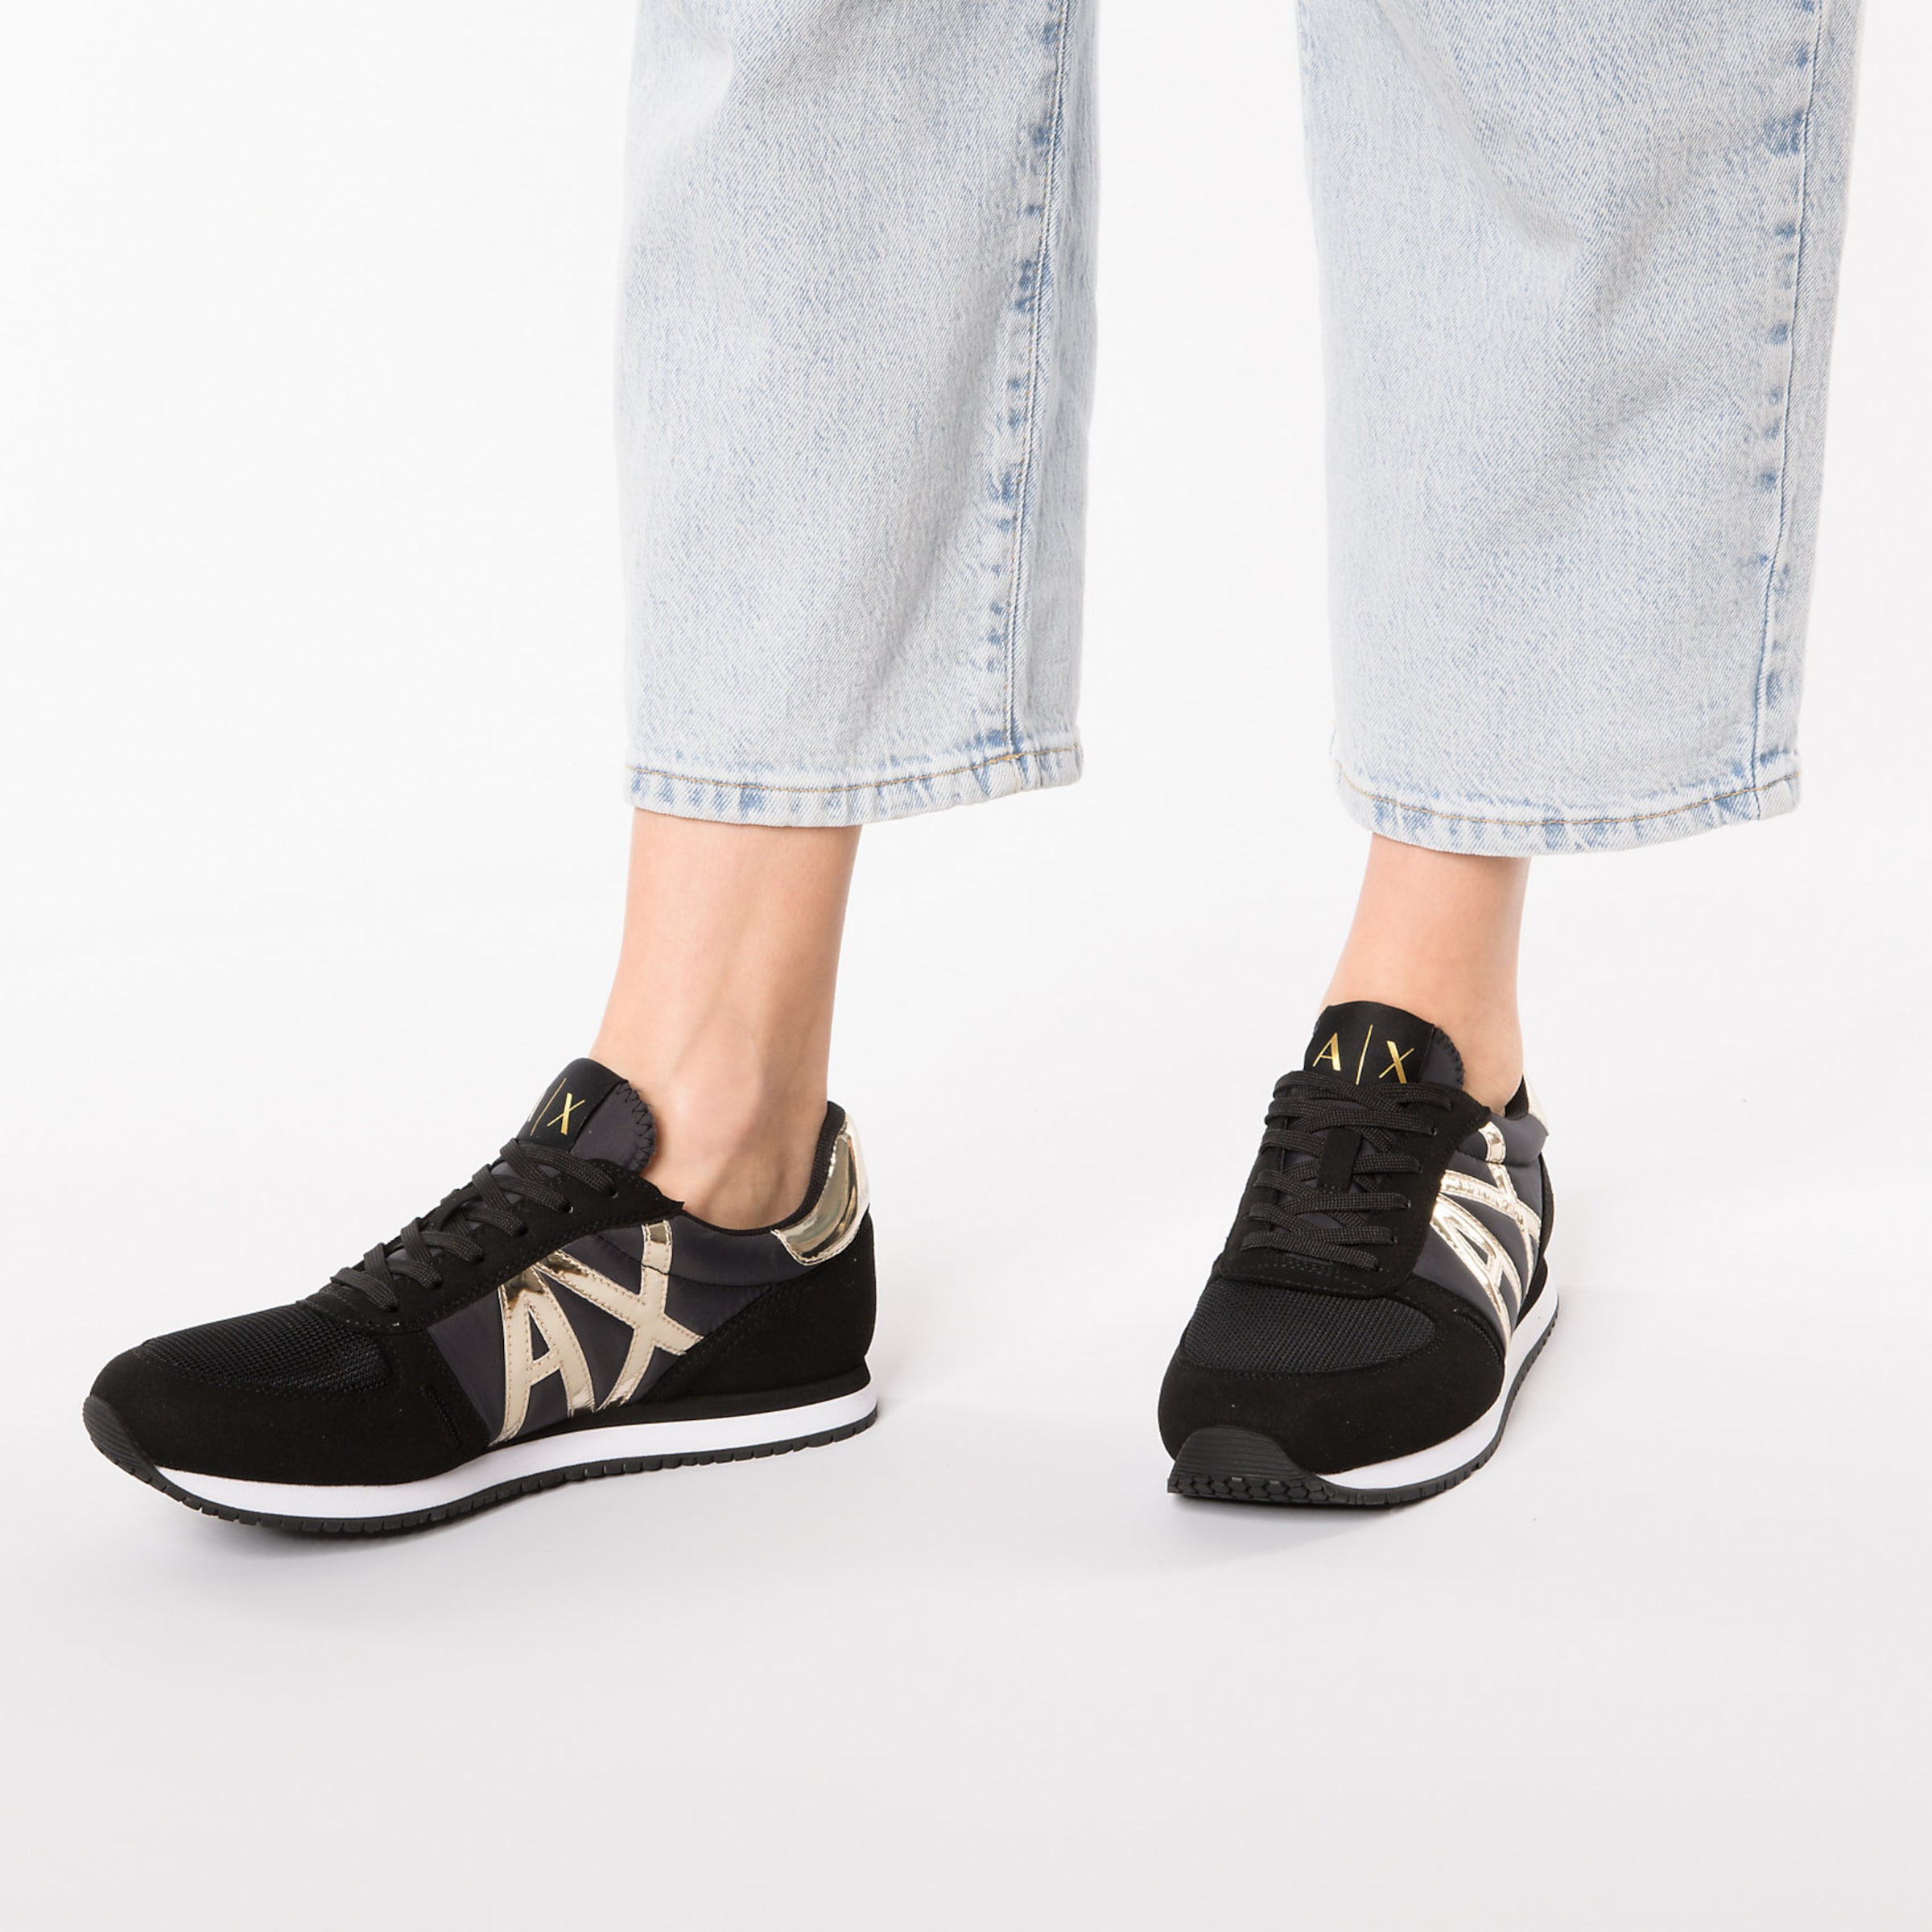 Armani Exchange MALIKA Black / White - Fast delivery | Spartoo Europe ! -  Shoes Low top trainers Men 149,60 €